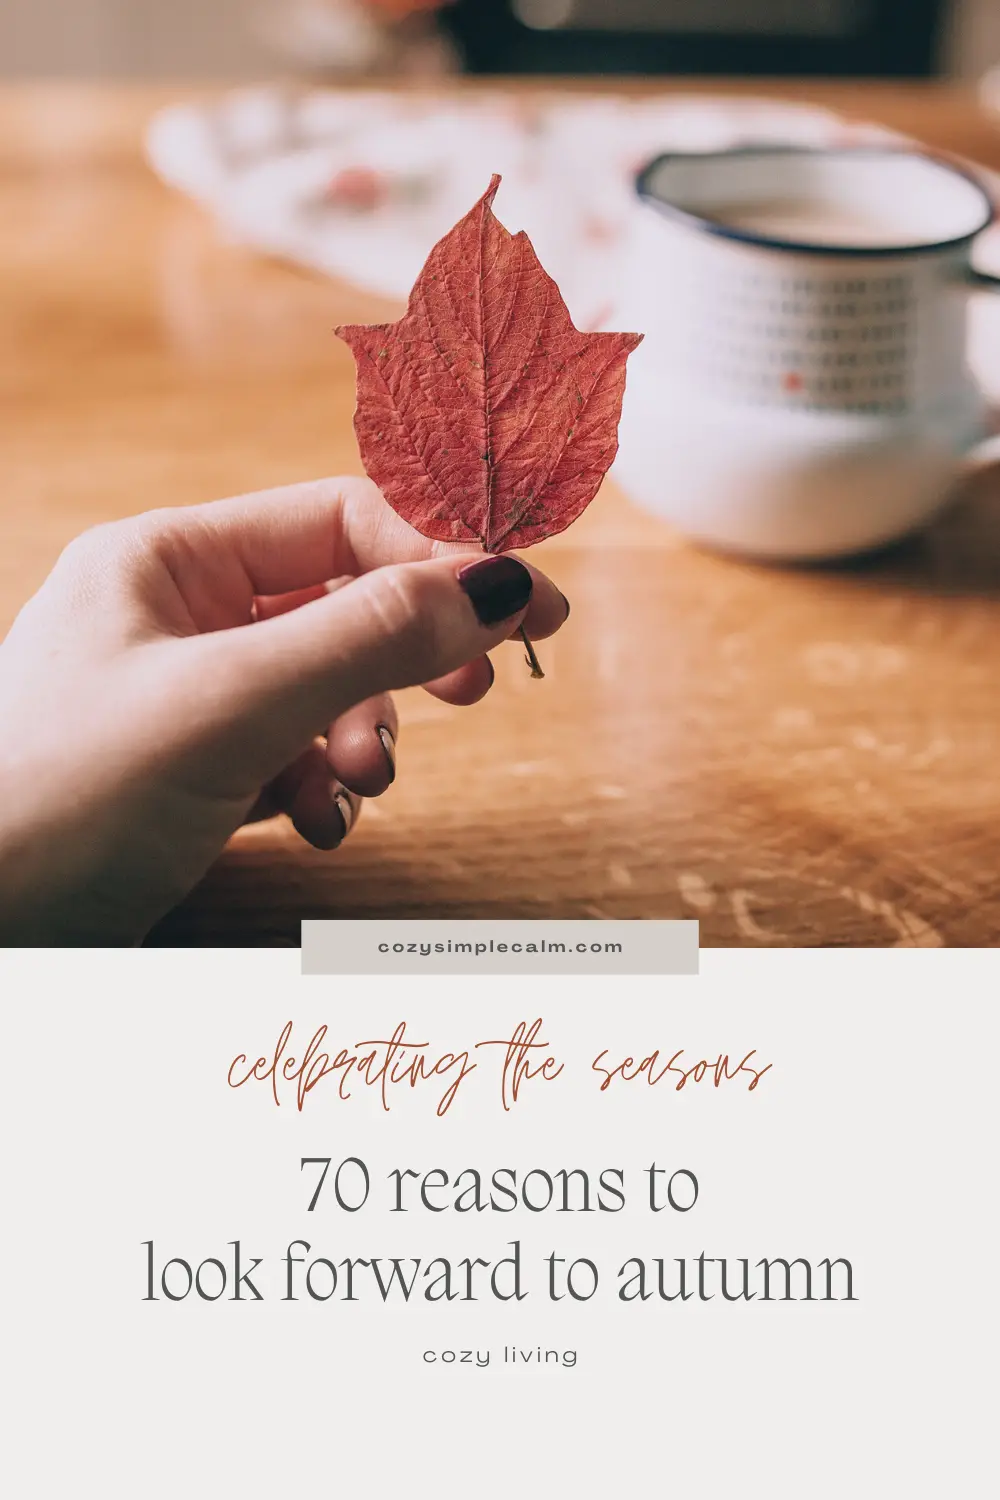 Image of hand holding red fall leaf in front of blurred coffee mug on table - Text overlay: Celebrating the seasons - 70 reasons to look forward to autumn - cozysimplecalm.com